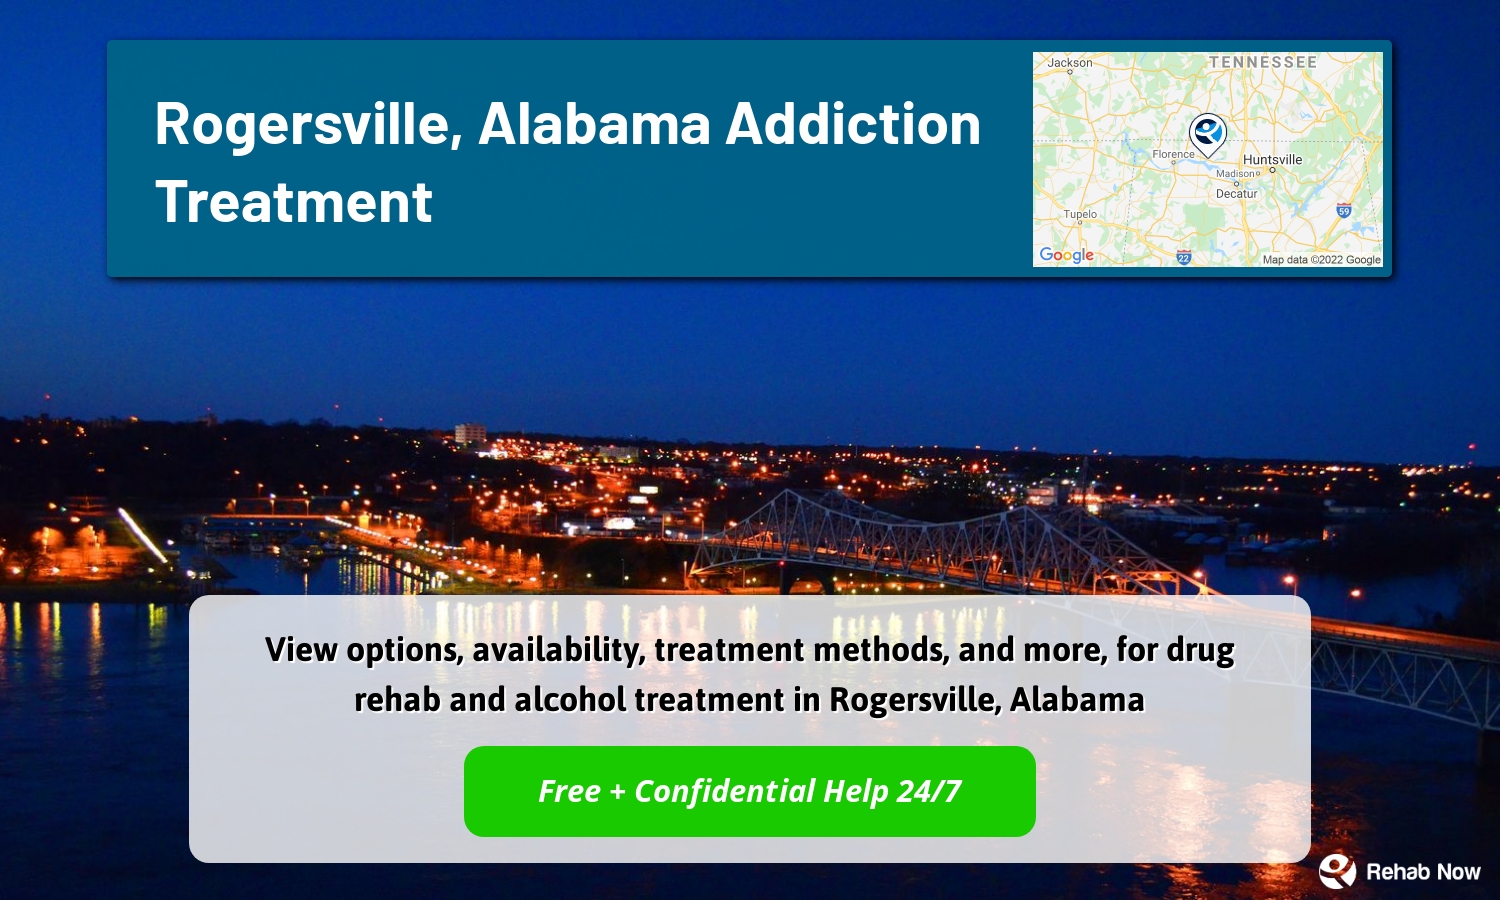 View options, availability, treatment methods, and more, for drug rehab and alcohol treatment in Rogersville, Alabama